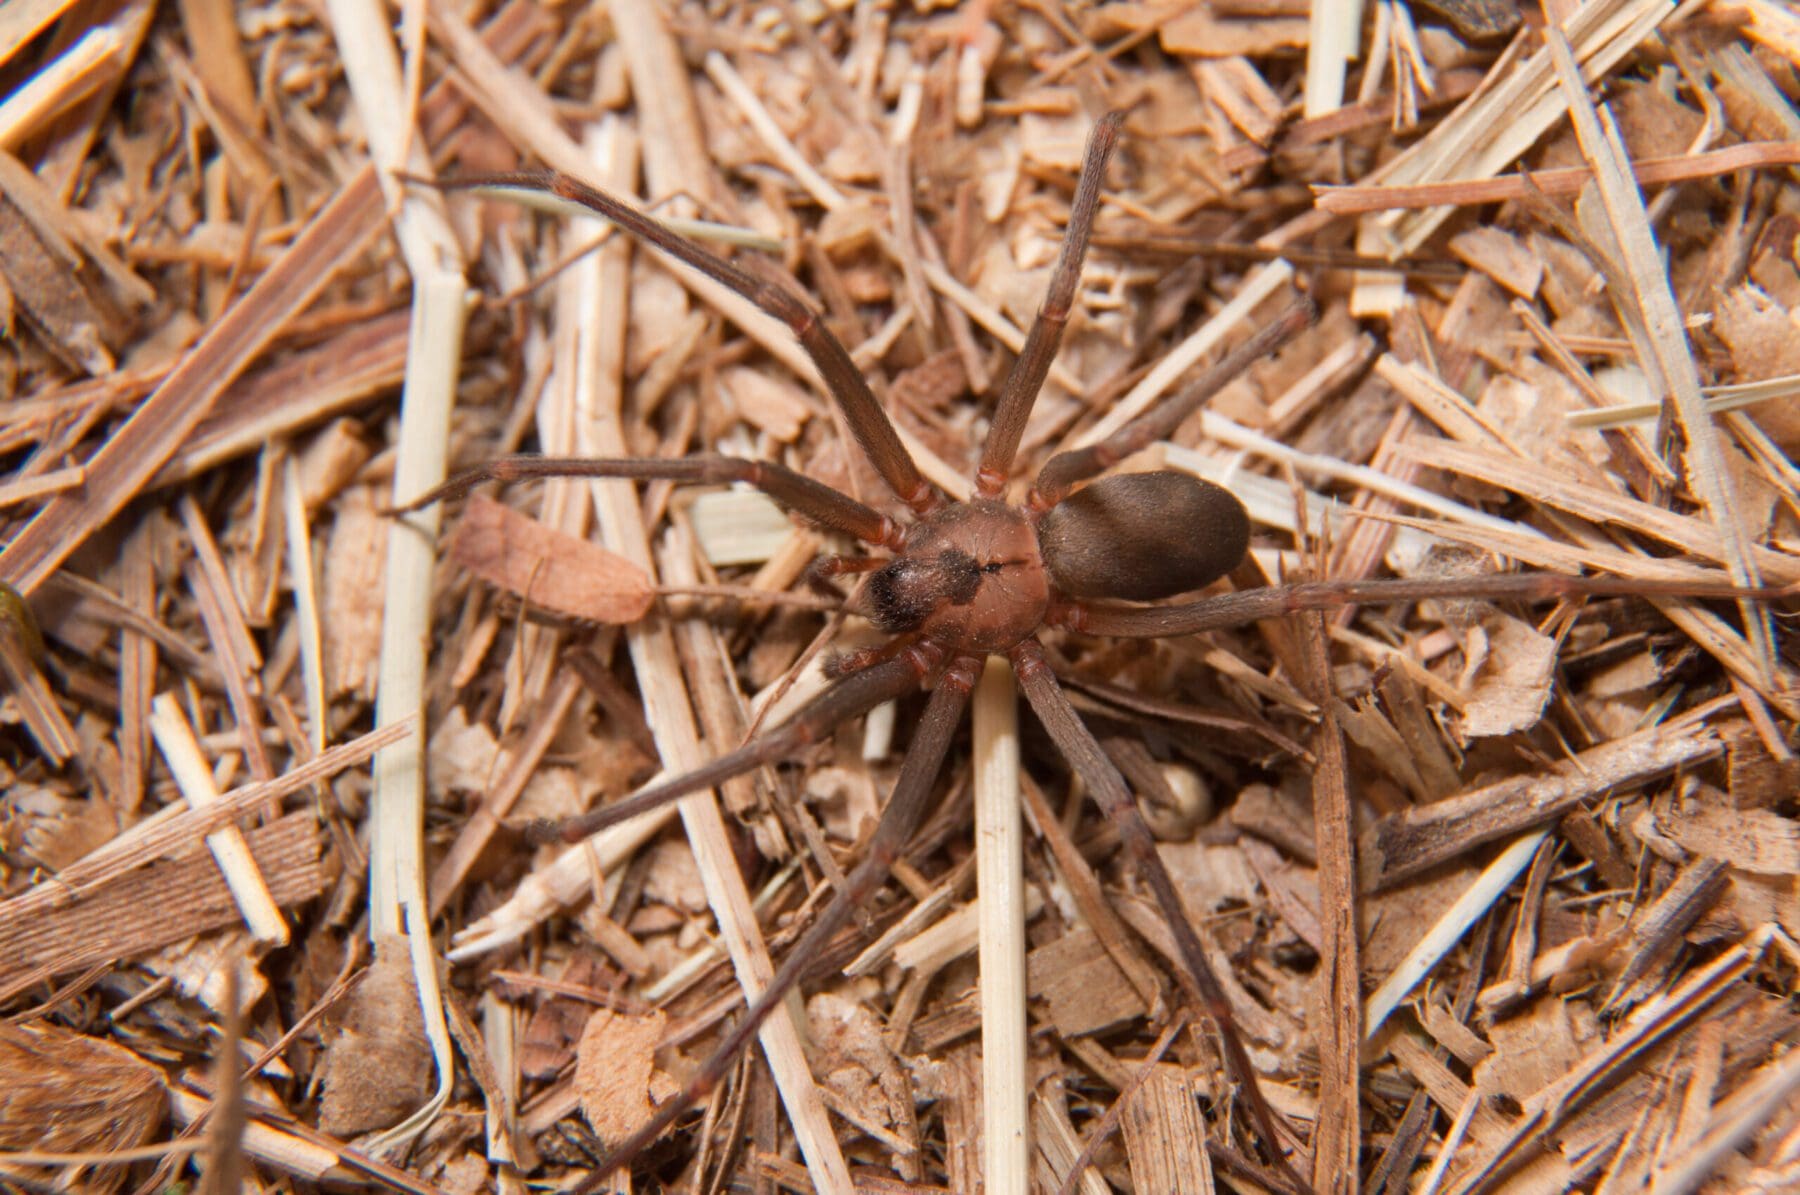 Brown recluse spider on hay or mulch